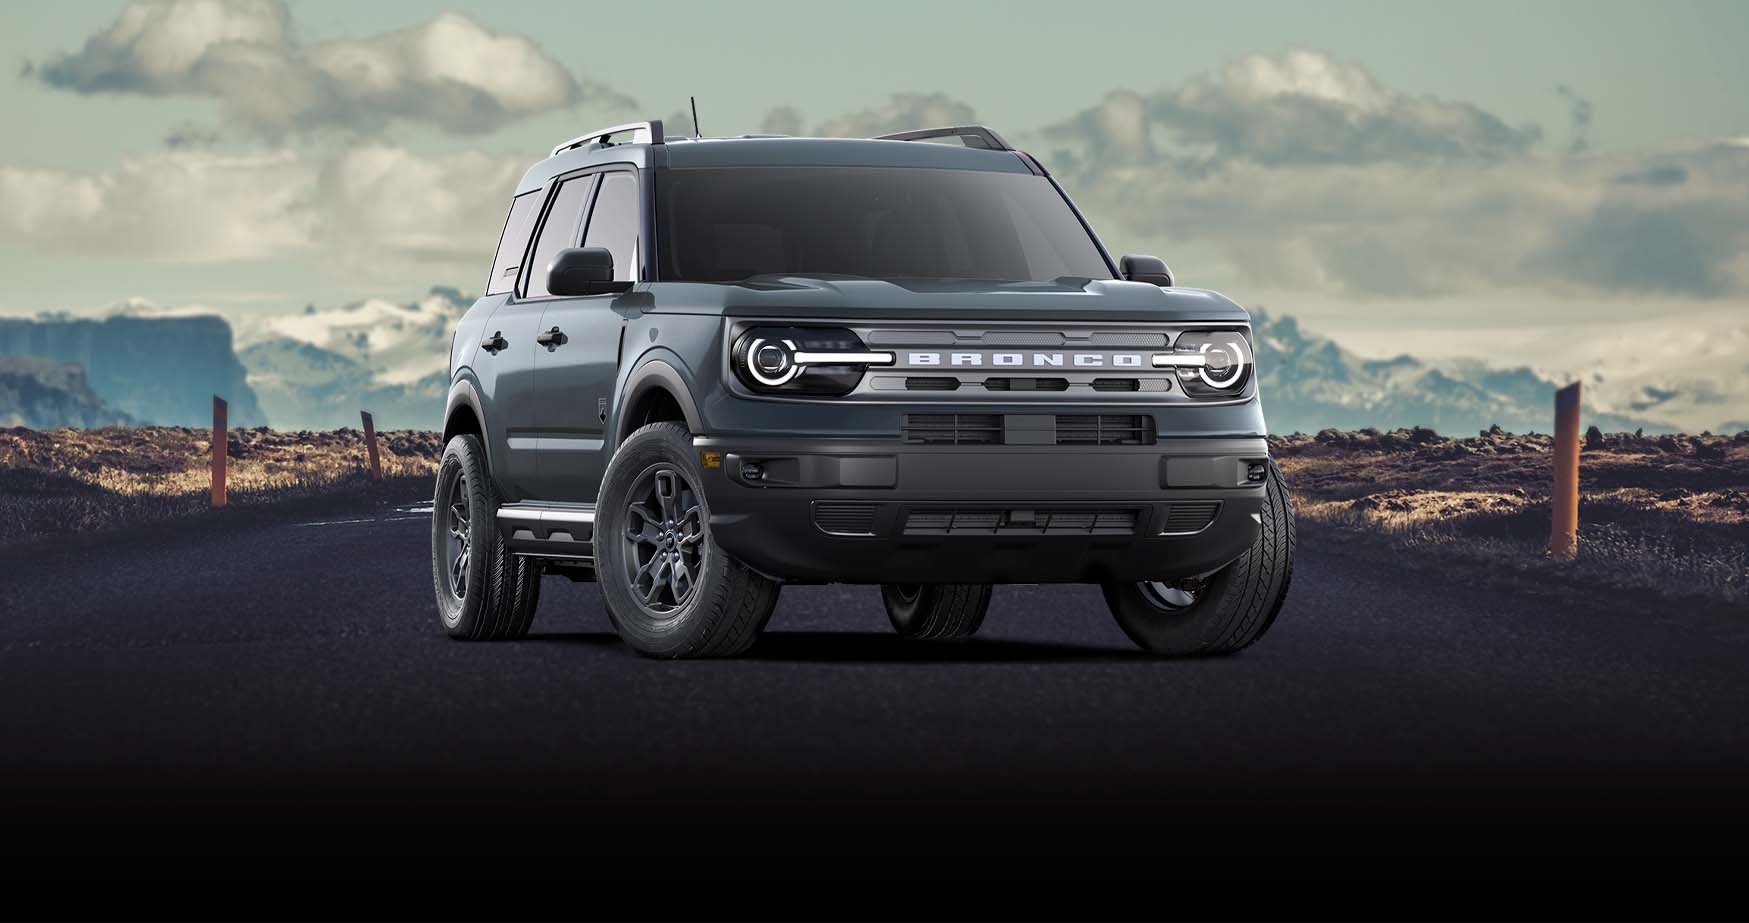 the 2022 Ford Bronco Sport is one of the better compact crossovers. Reserve a test drive of the latest 2022 Ford Bronco Sport at your local Ford dealership AutoFair Ford of Haverhill.